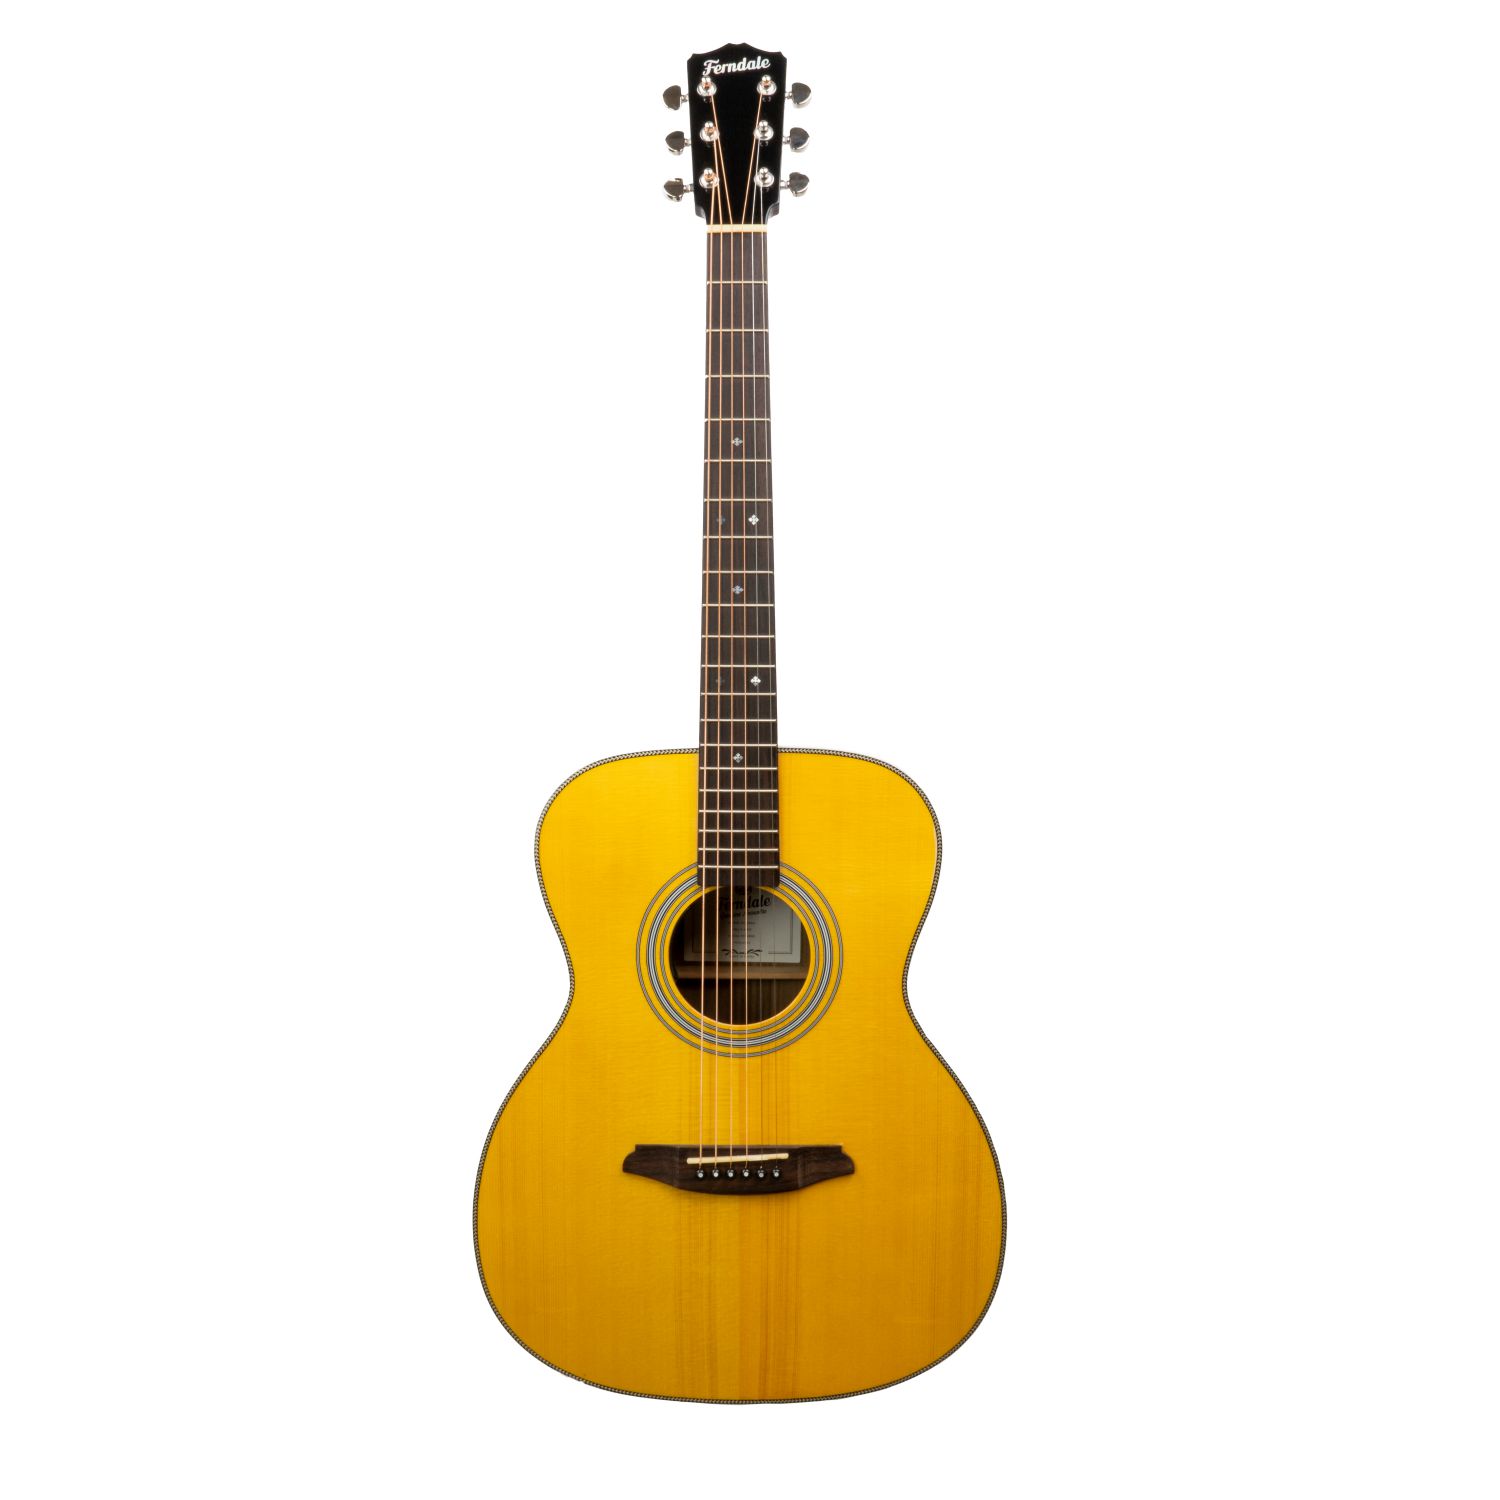 An image of Ferndale OM3-E-S-RW Electro Acoustic Guitar | PMT Online